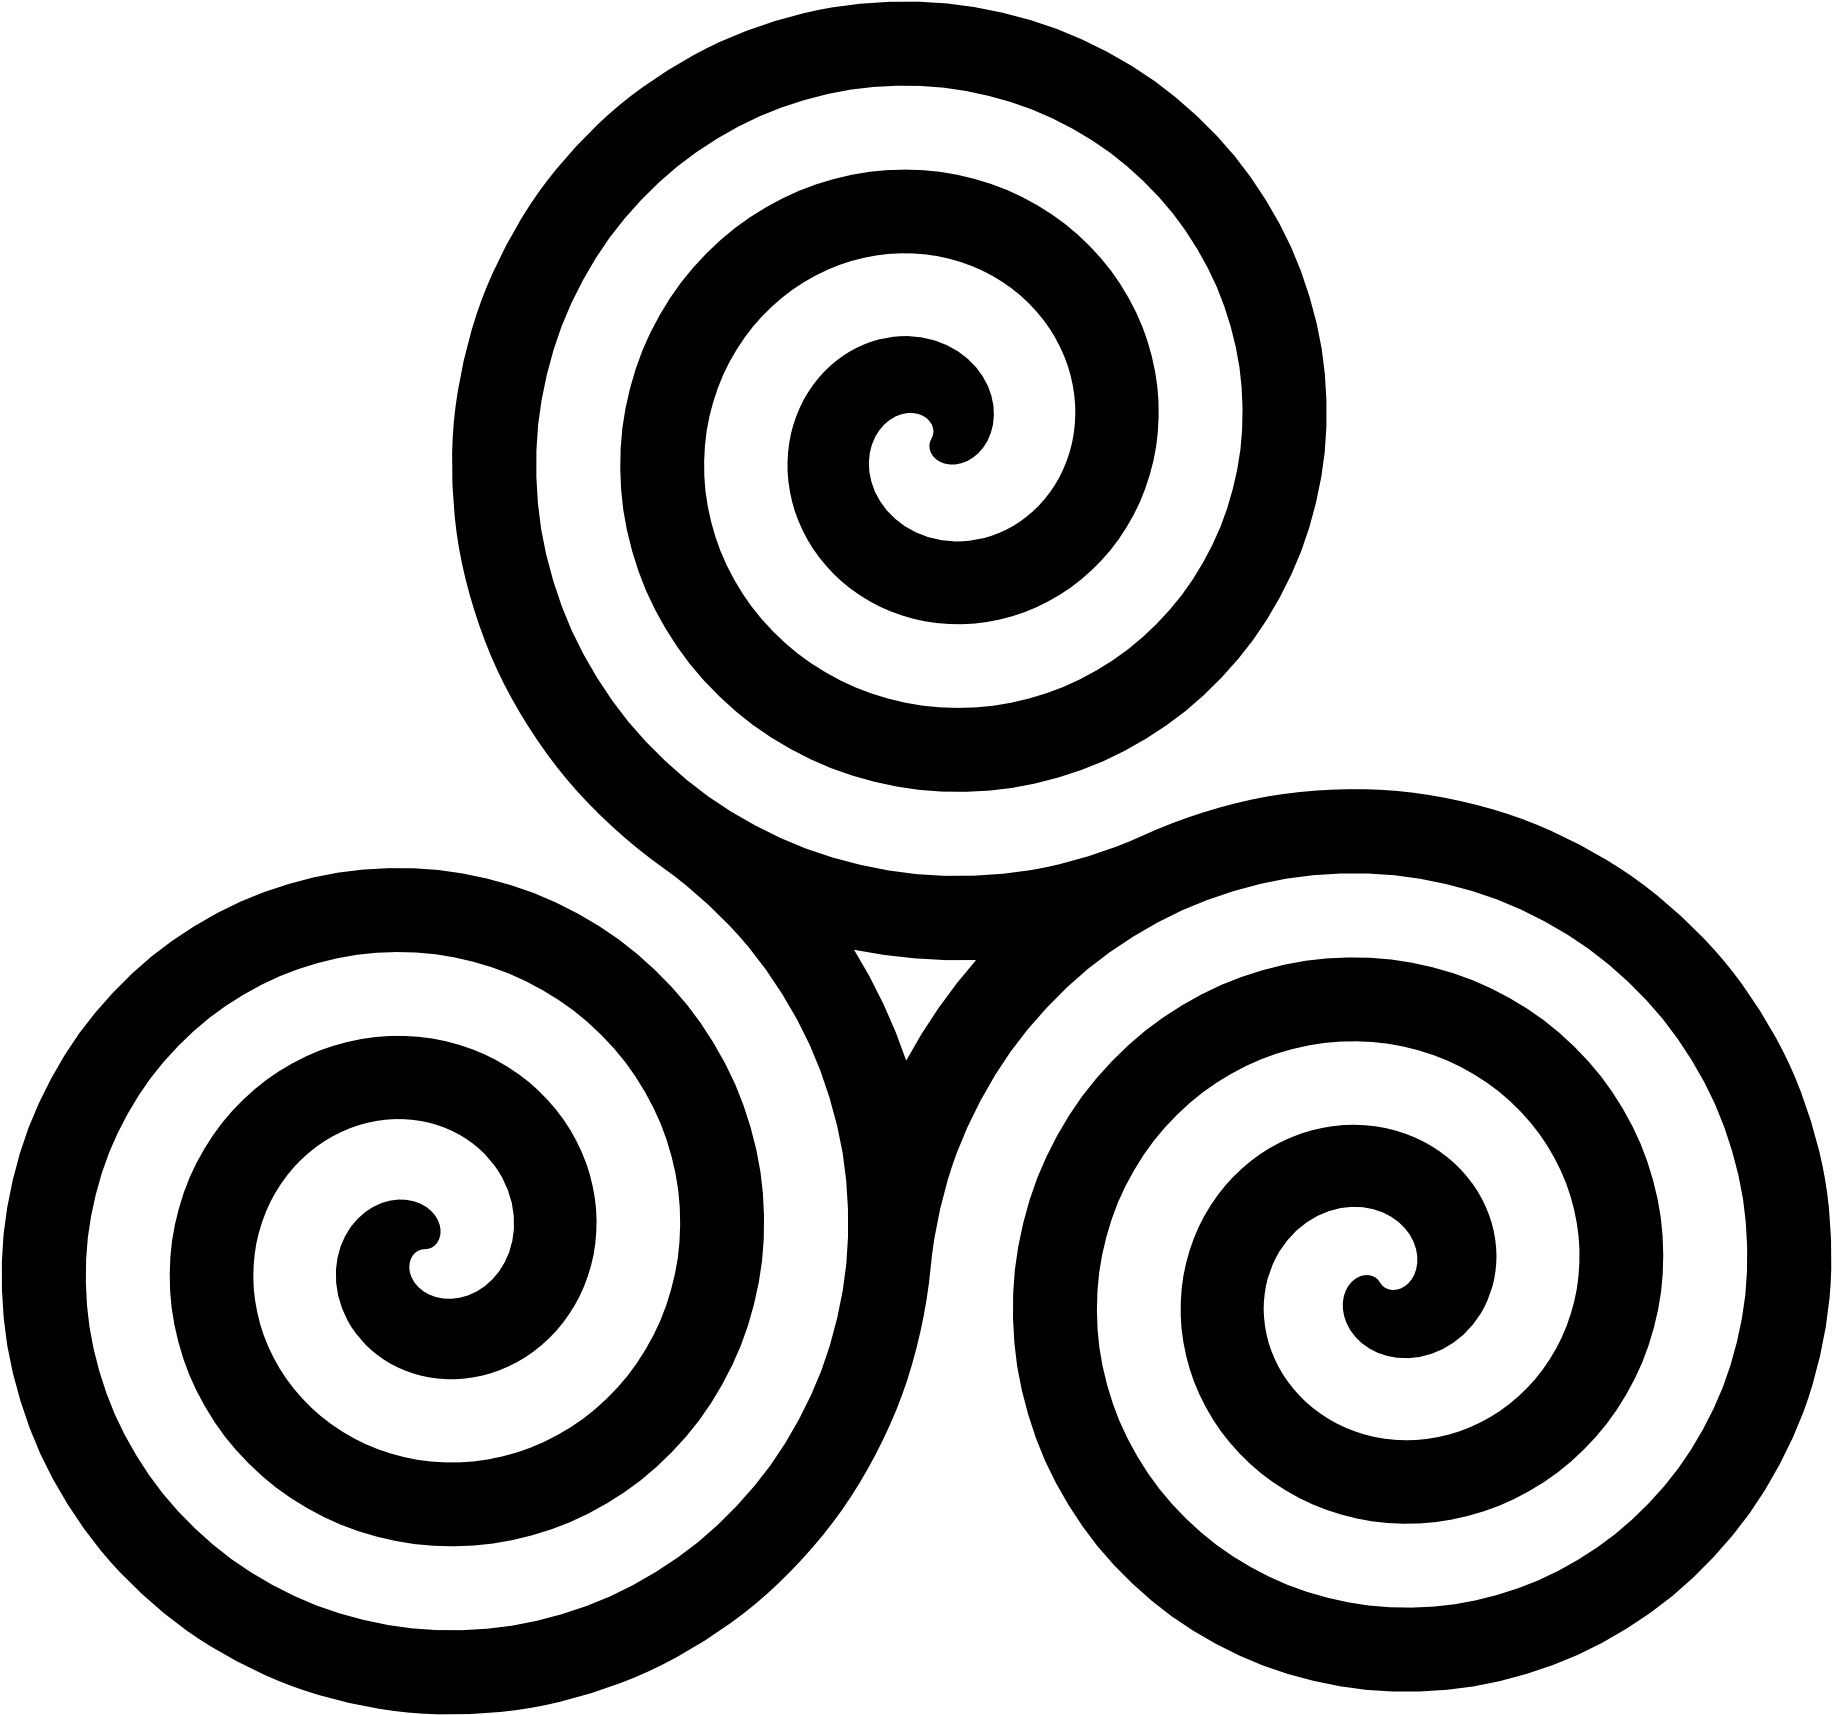 A Black And White Image Of A Triple Spiral